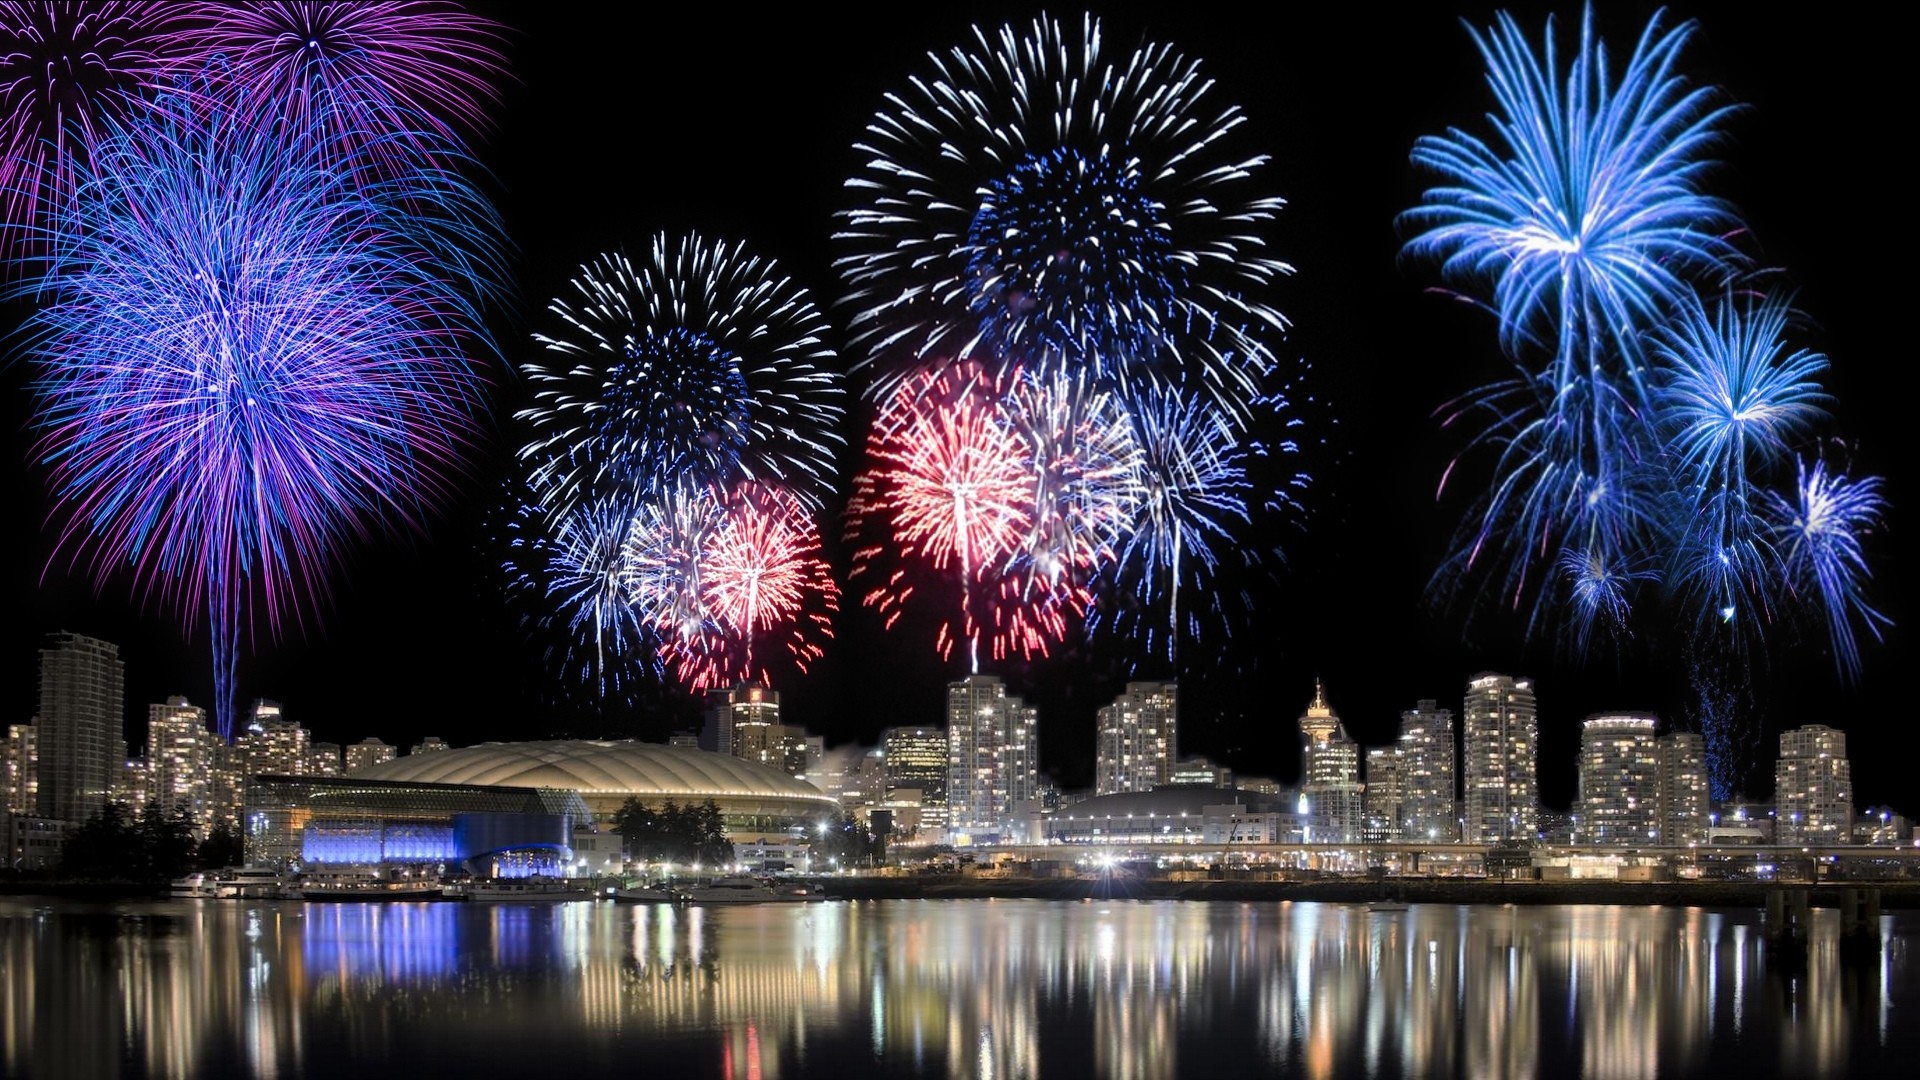 1920x1080 Fireworks Live Wallpaper - Android Apps on Google Play